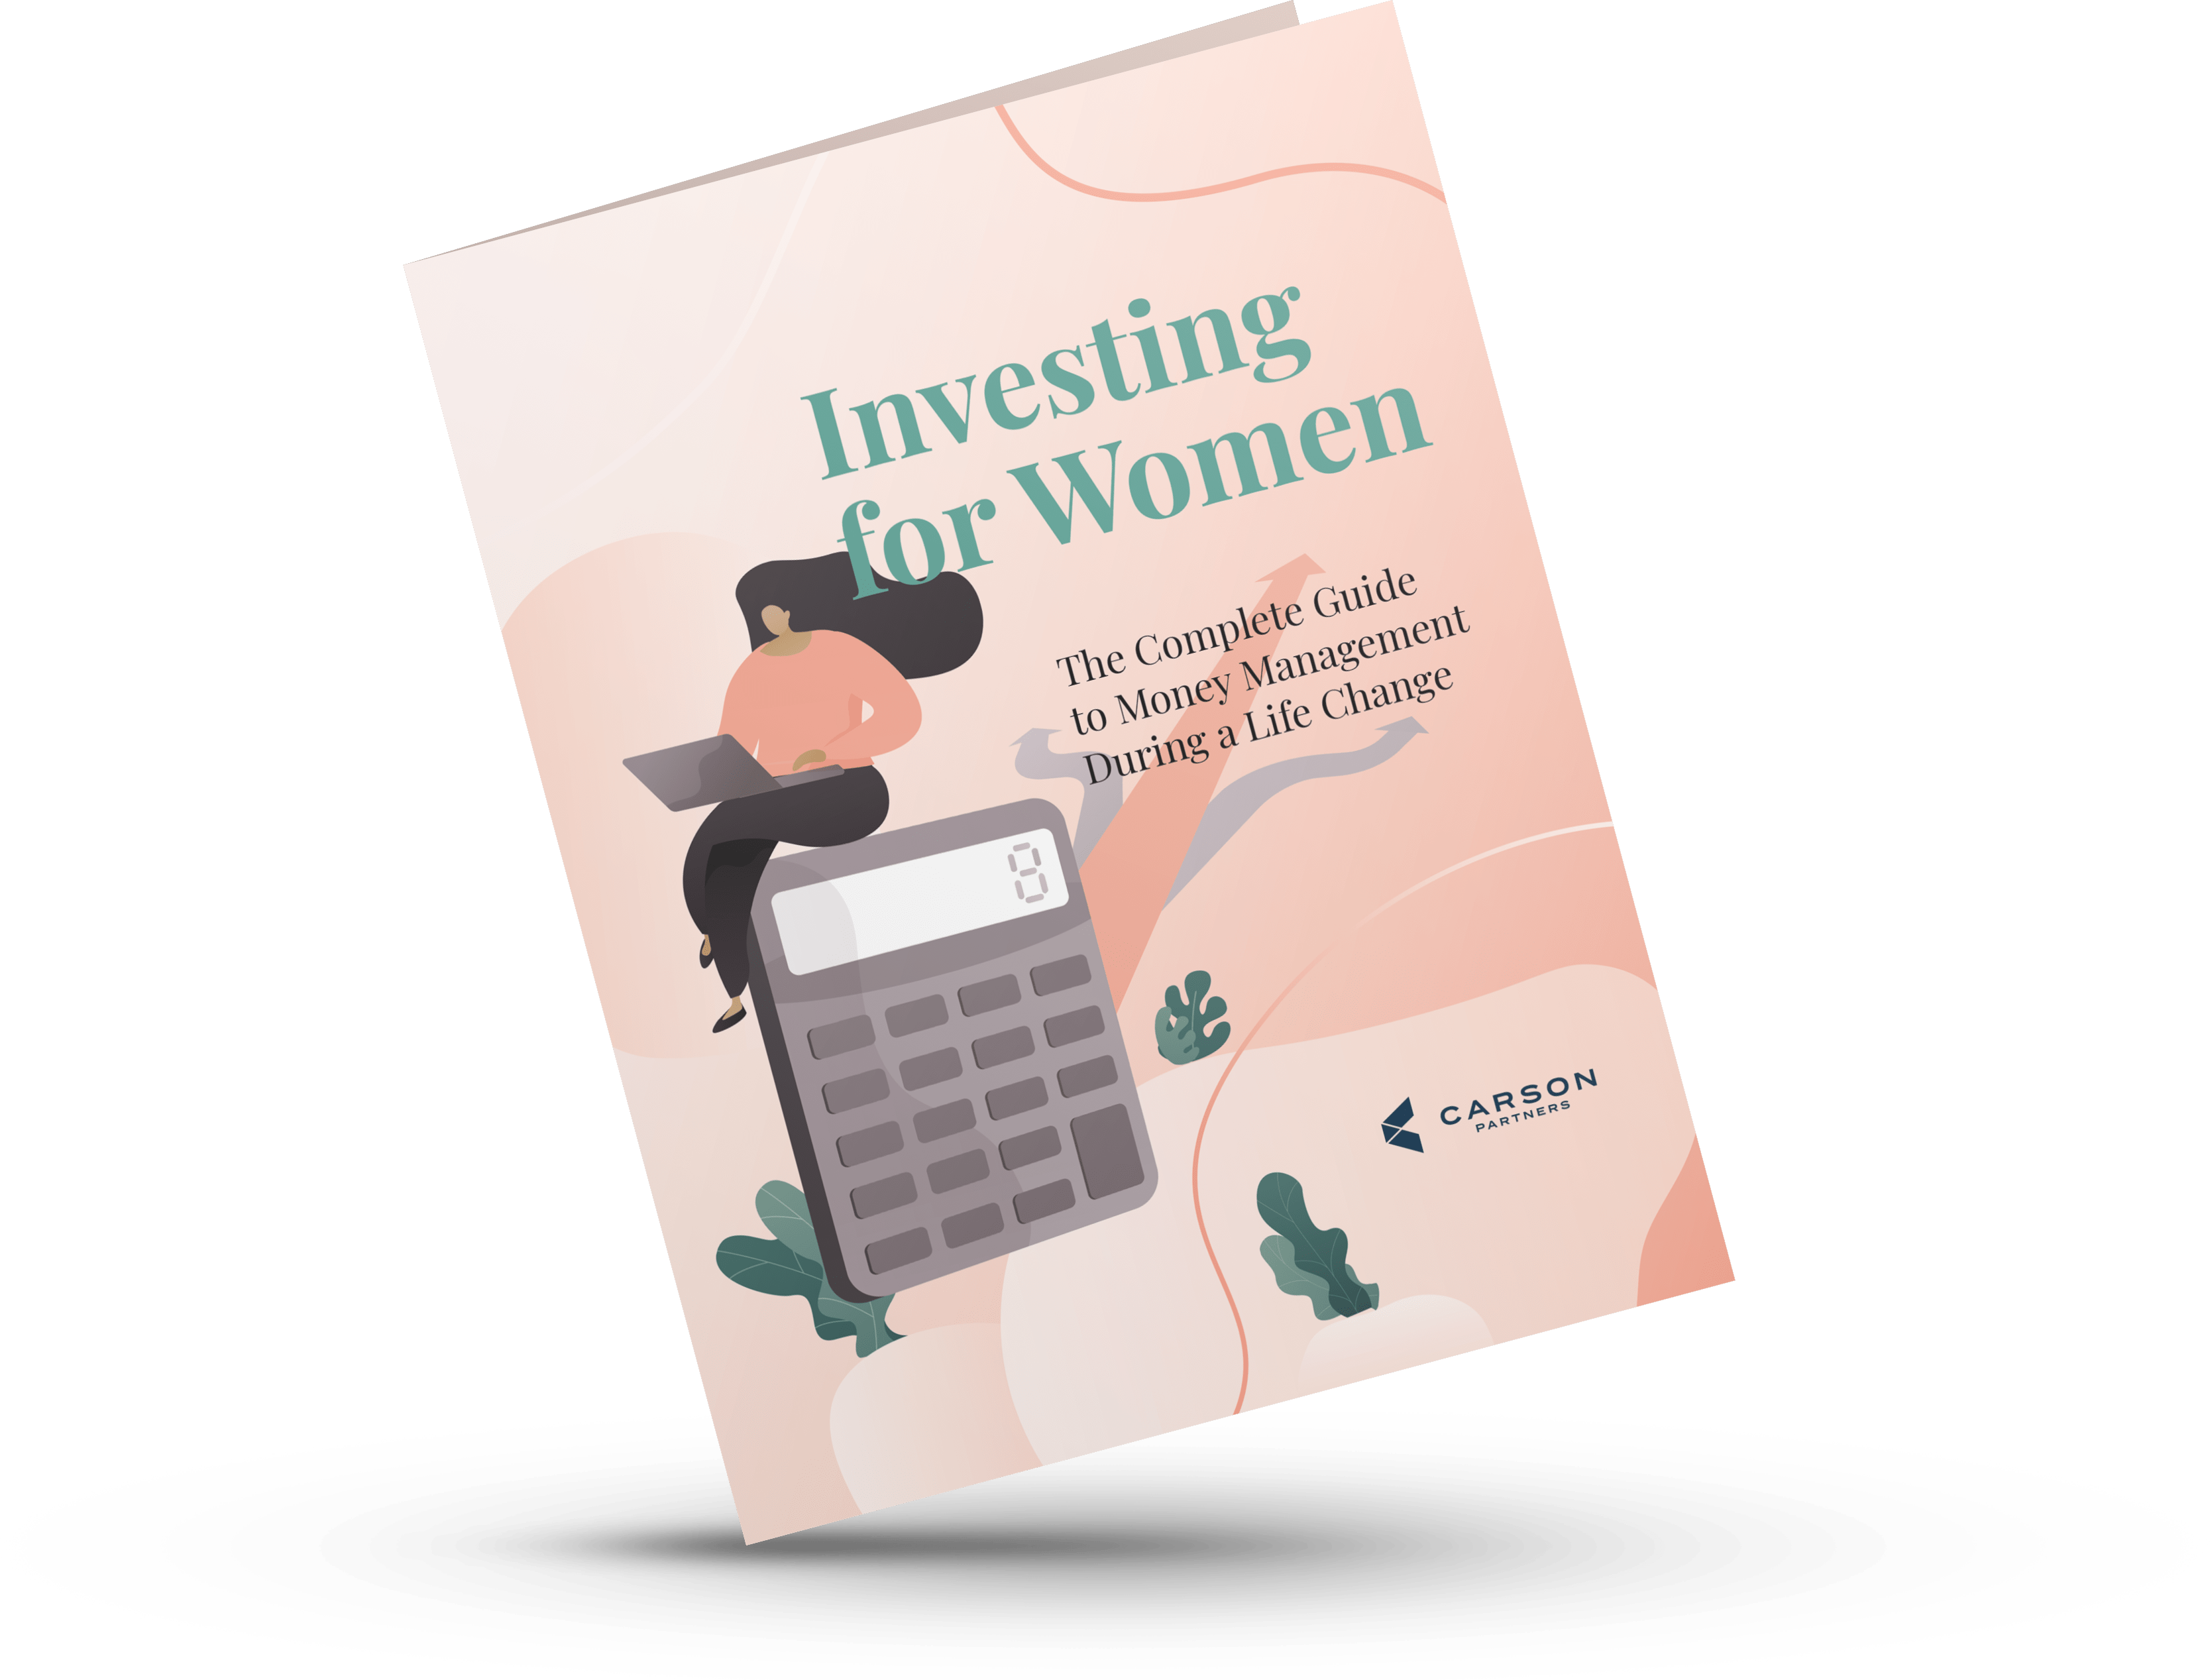 Free Resource: Investing for Women - The Complete Guide to Money Management During a Life Change